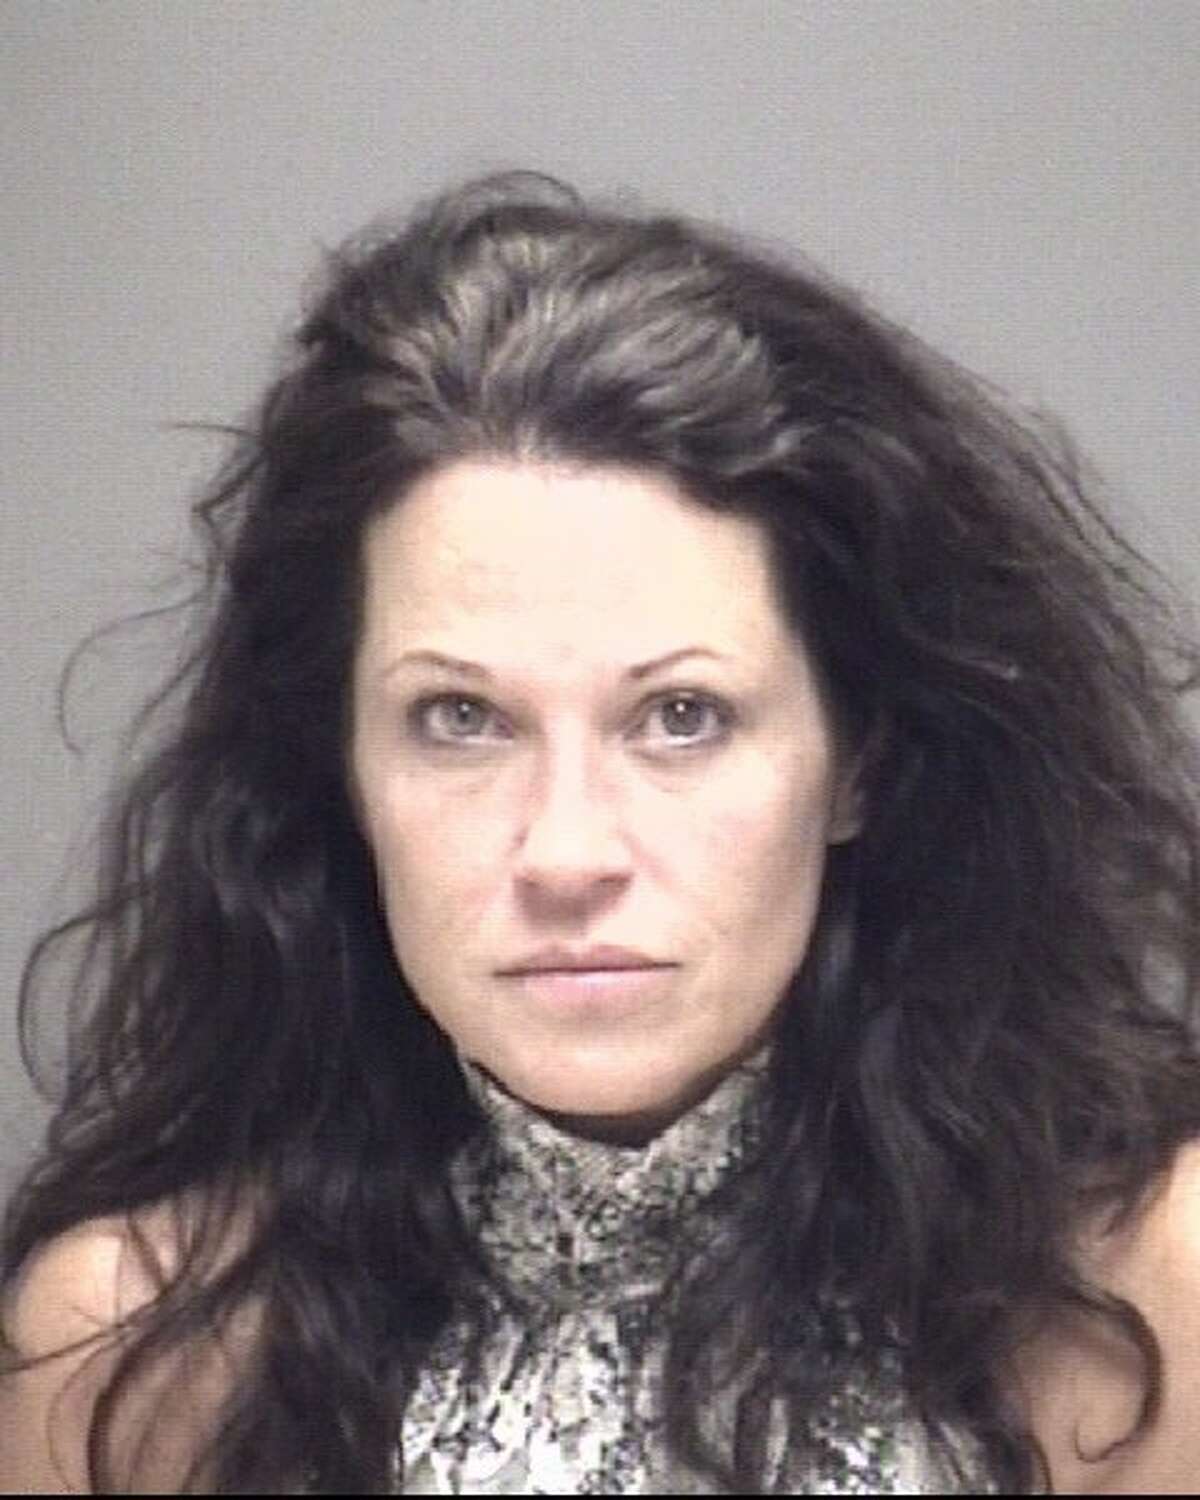 Jennifer Wray was arrested on a charge of DWI with a child passenger.